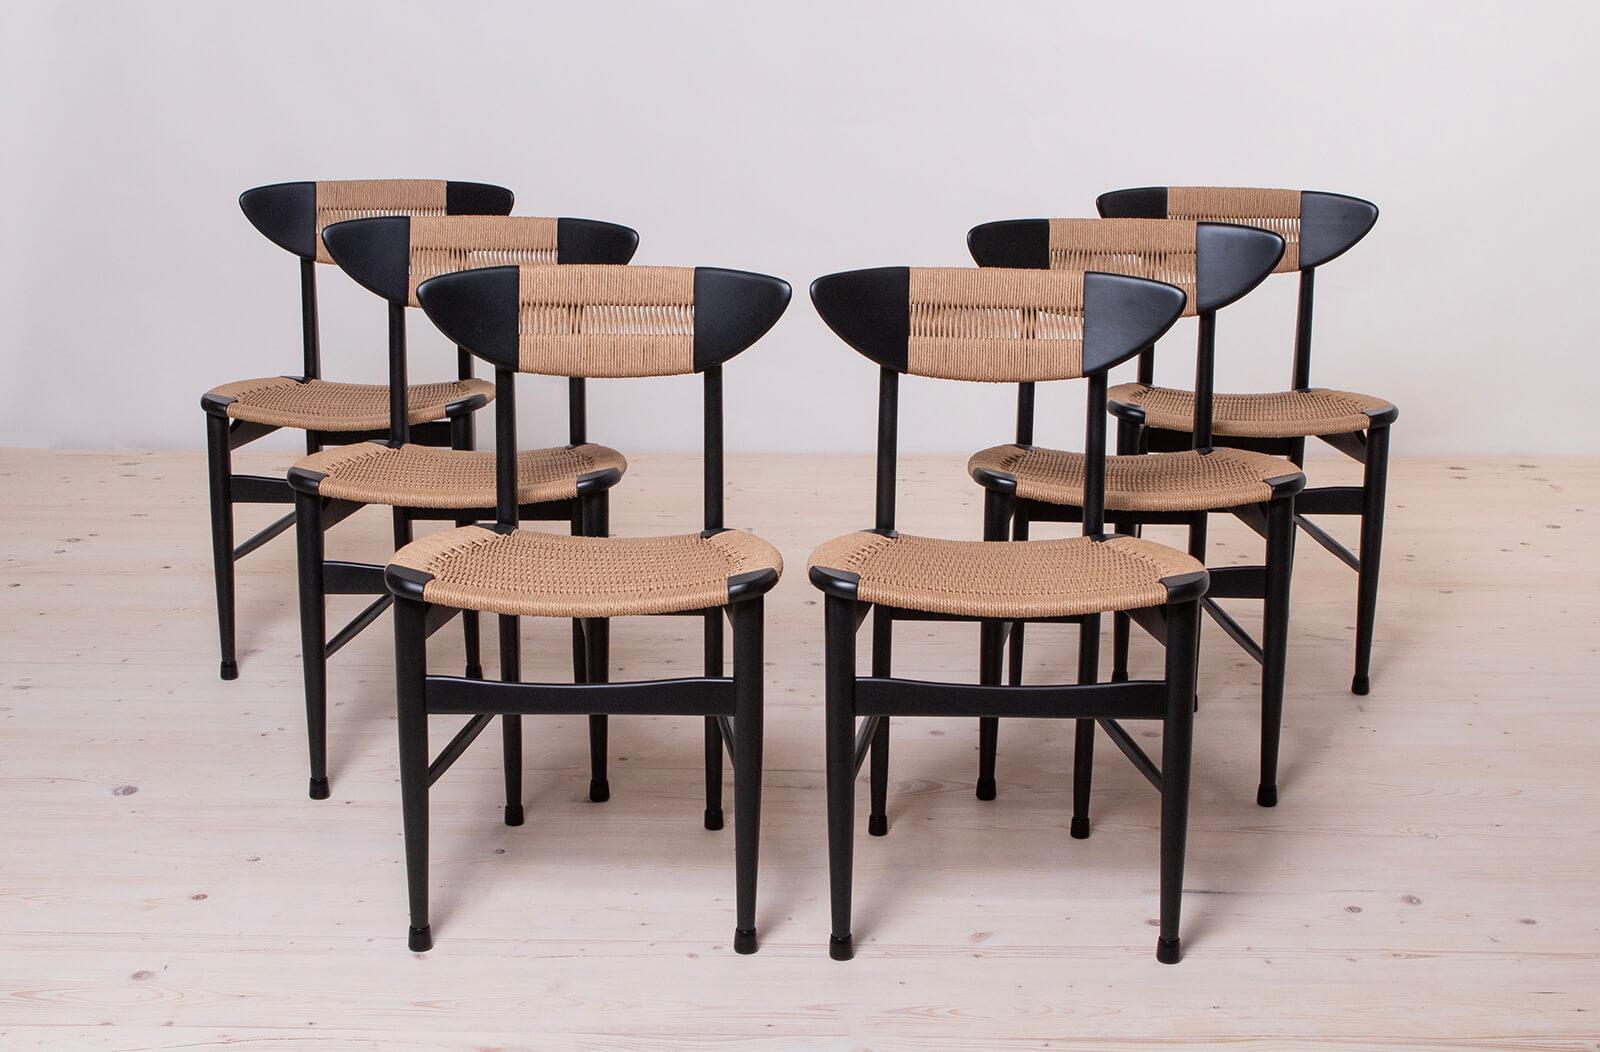 This set of six vintage dining chairs was made around 1960s, most probably in Italy. The whole set was carefully restored, all wooden elements have been cleaned and refinished with black polyurethane paint. Rope seatings and backrests have been